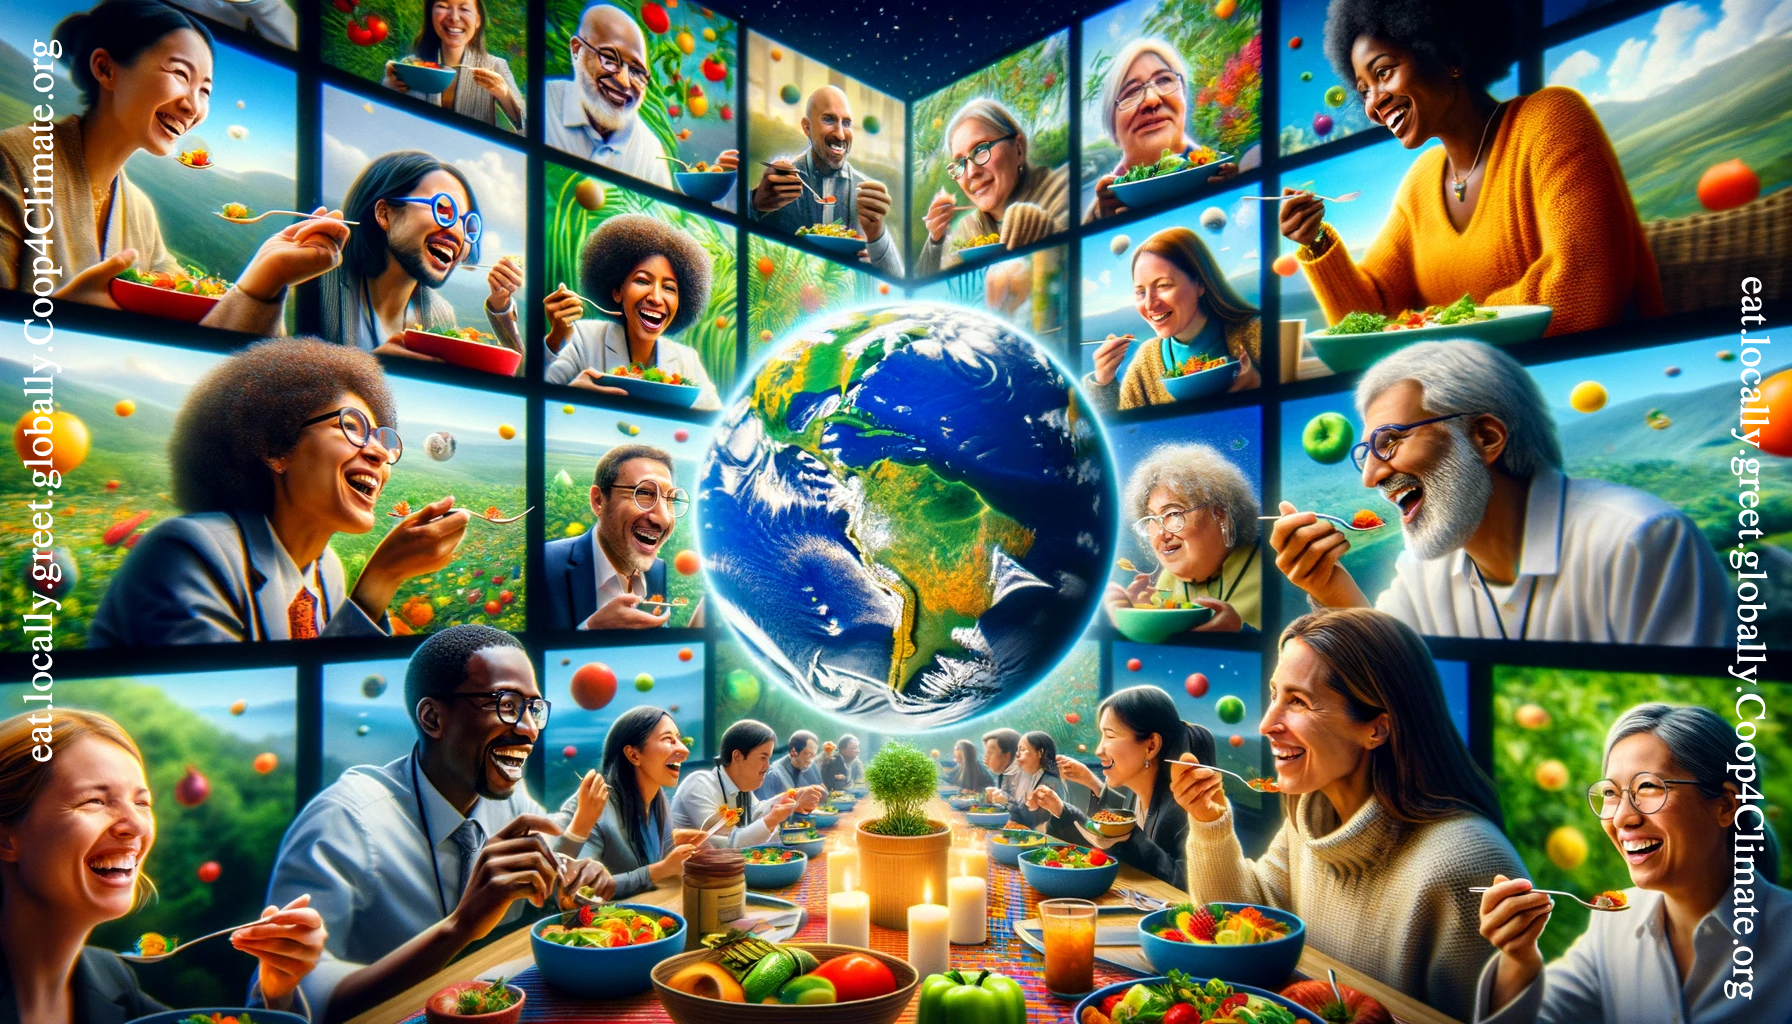 A spirited exchange of perspectives at the Coop4Climate Virtual Dinner Party